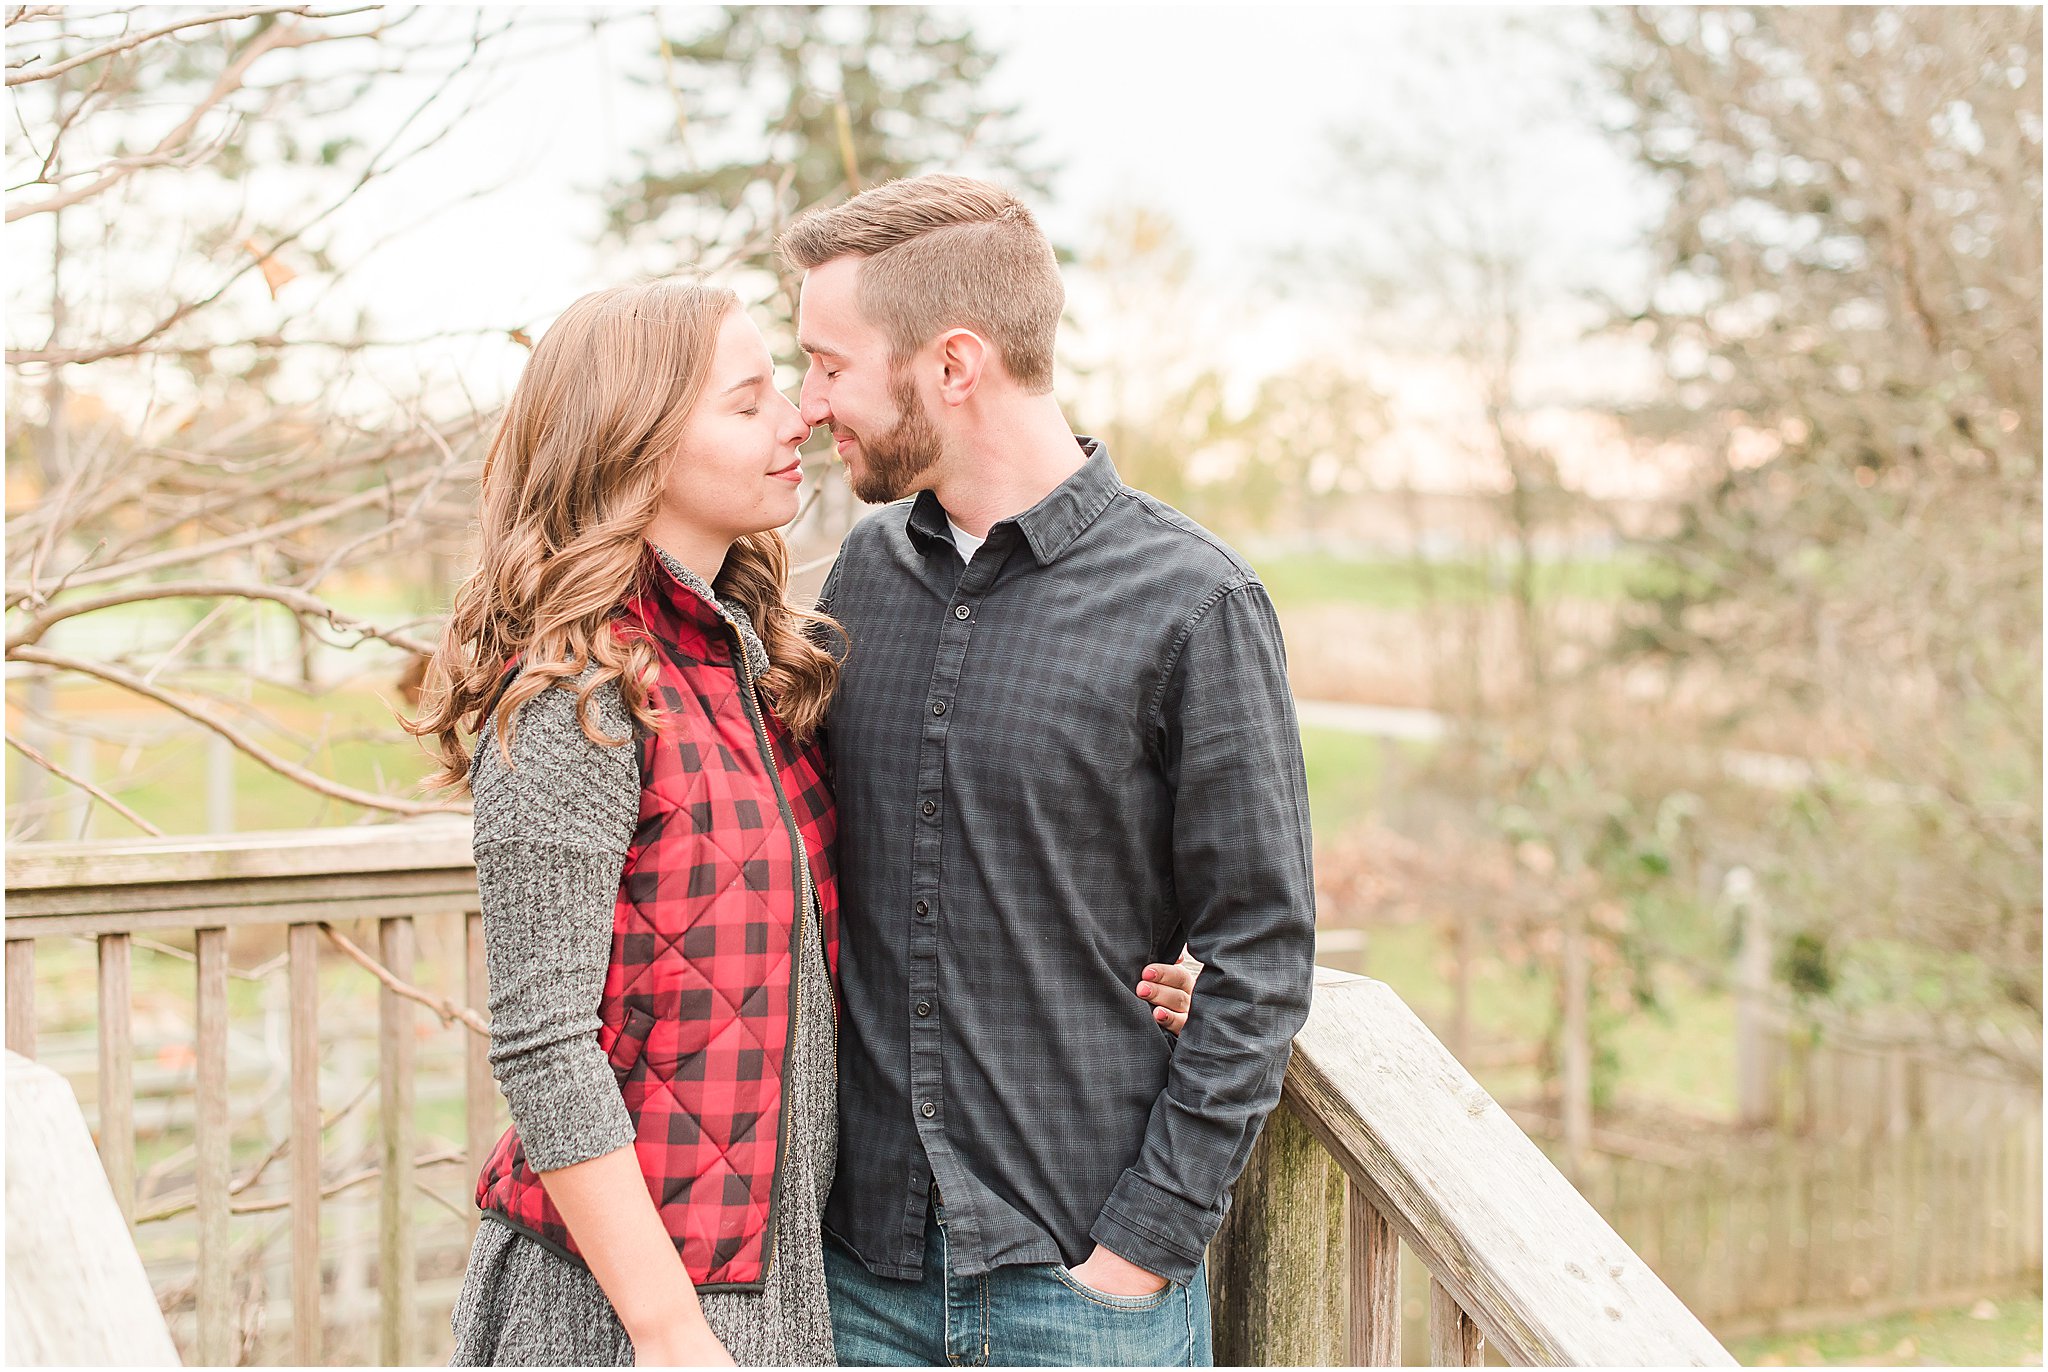 Tips for Engagement Session Outfits